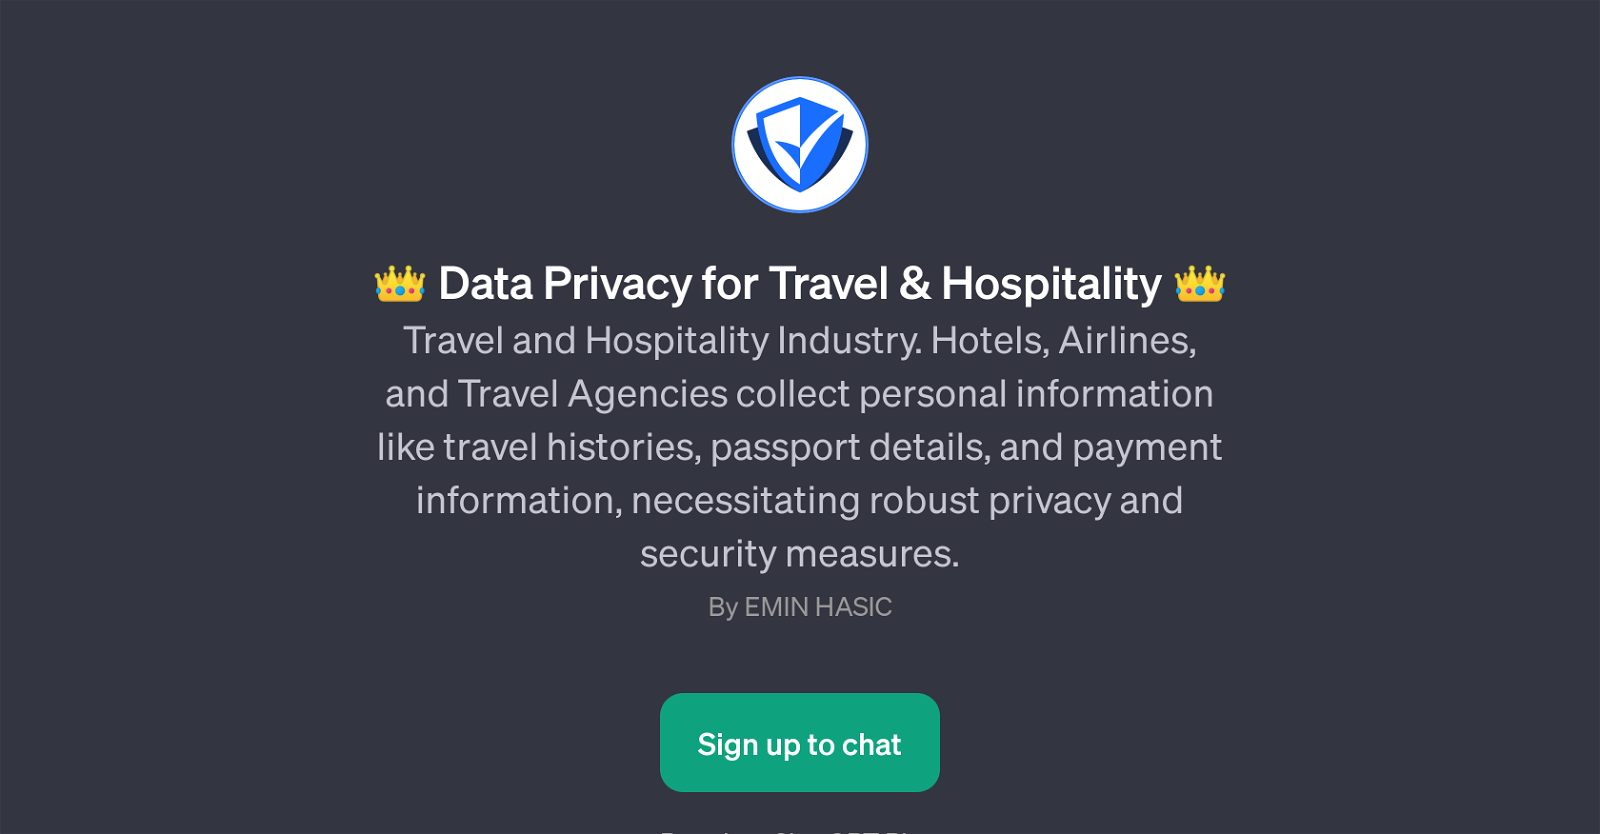 Data Privacy for Travel & Hospitality website